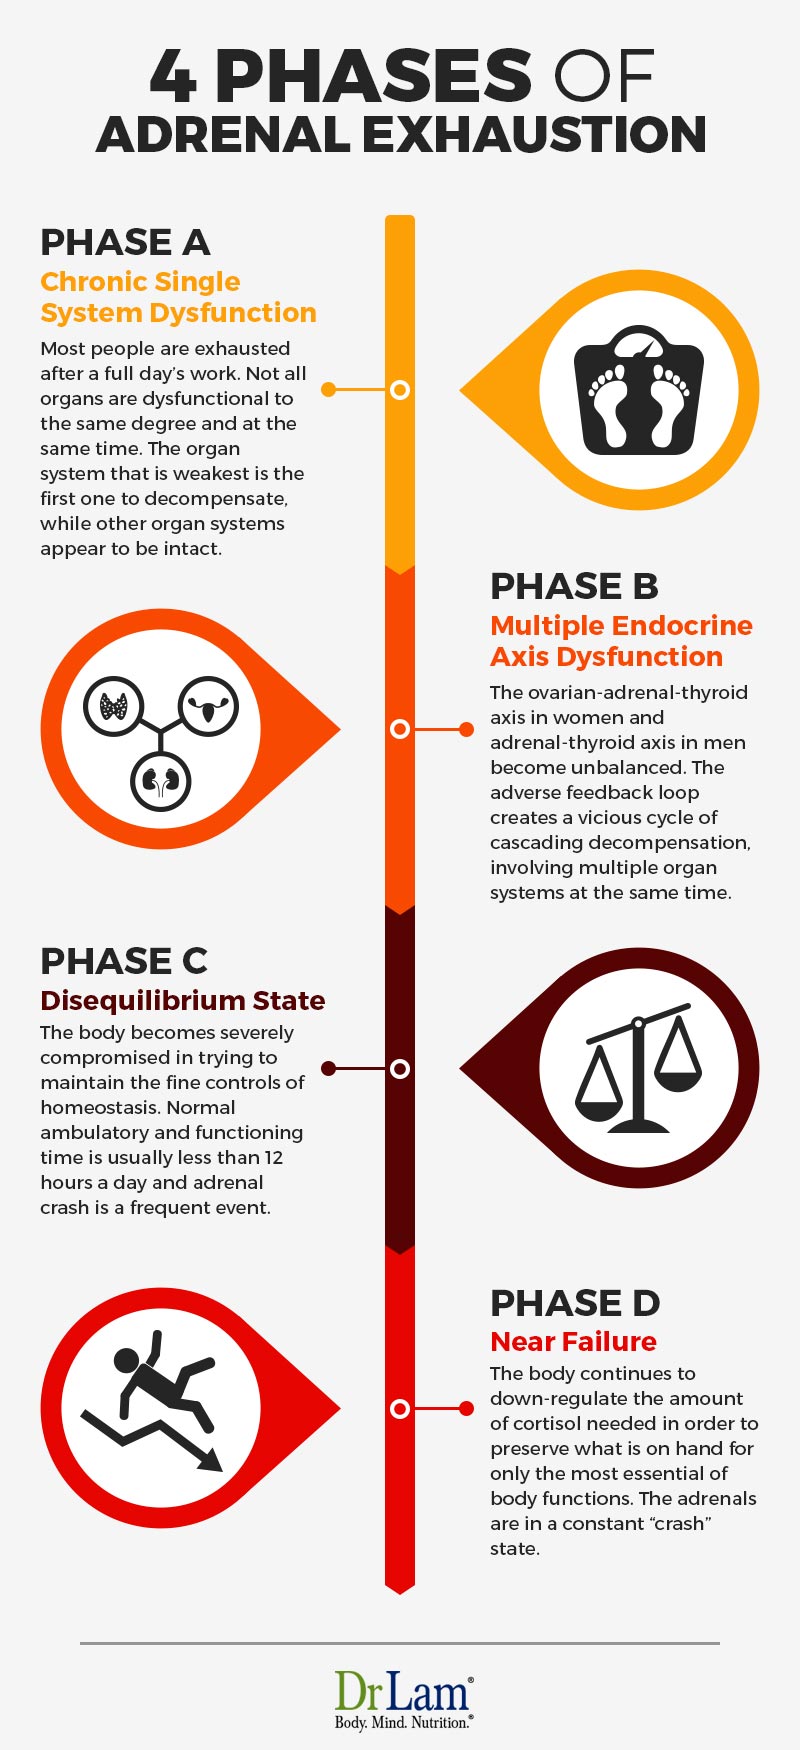 Check out this easy to understand infographic about the 4 phases of Adrenal Exhaustion